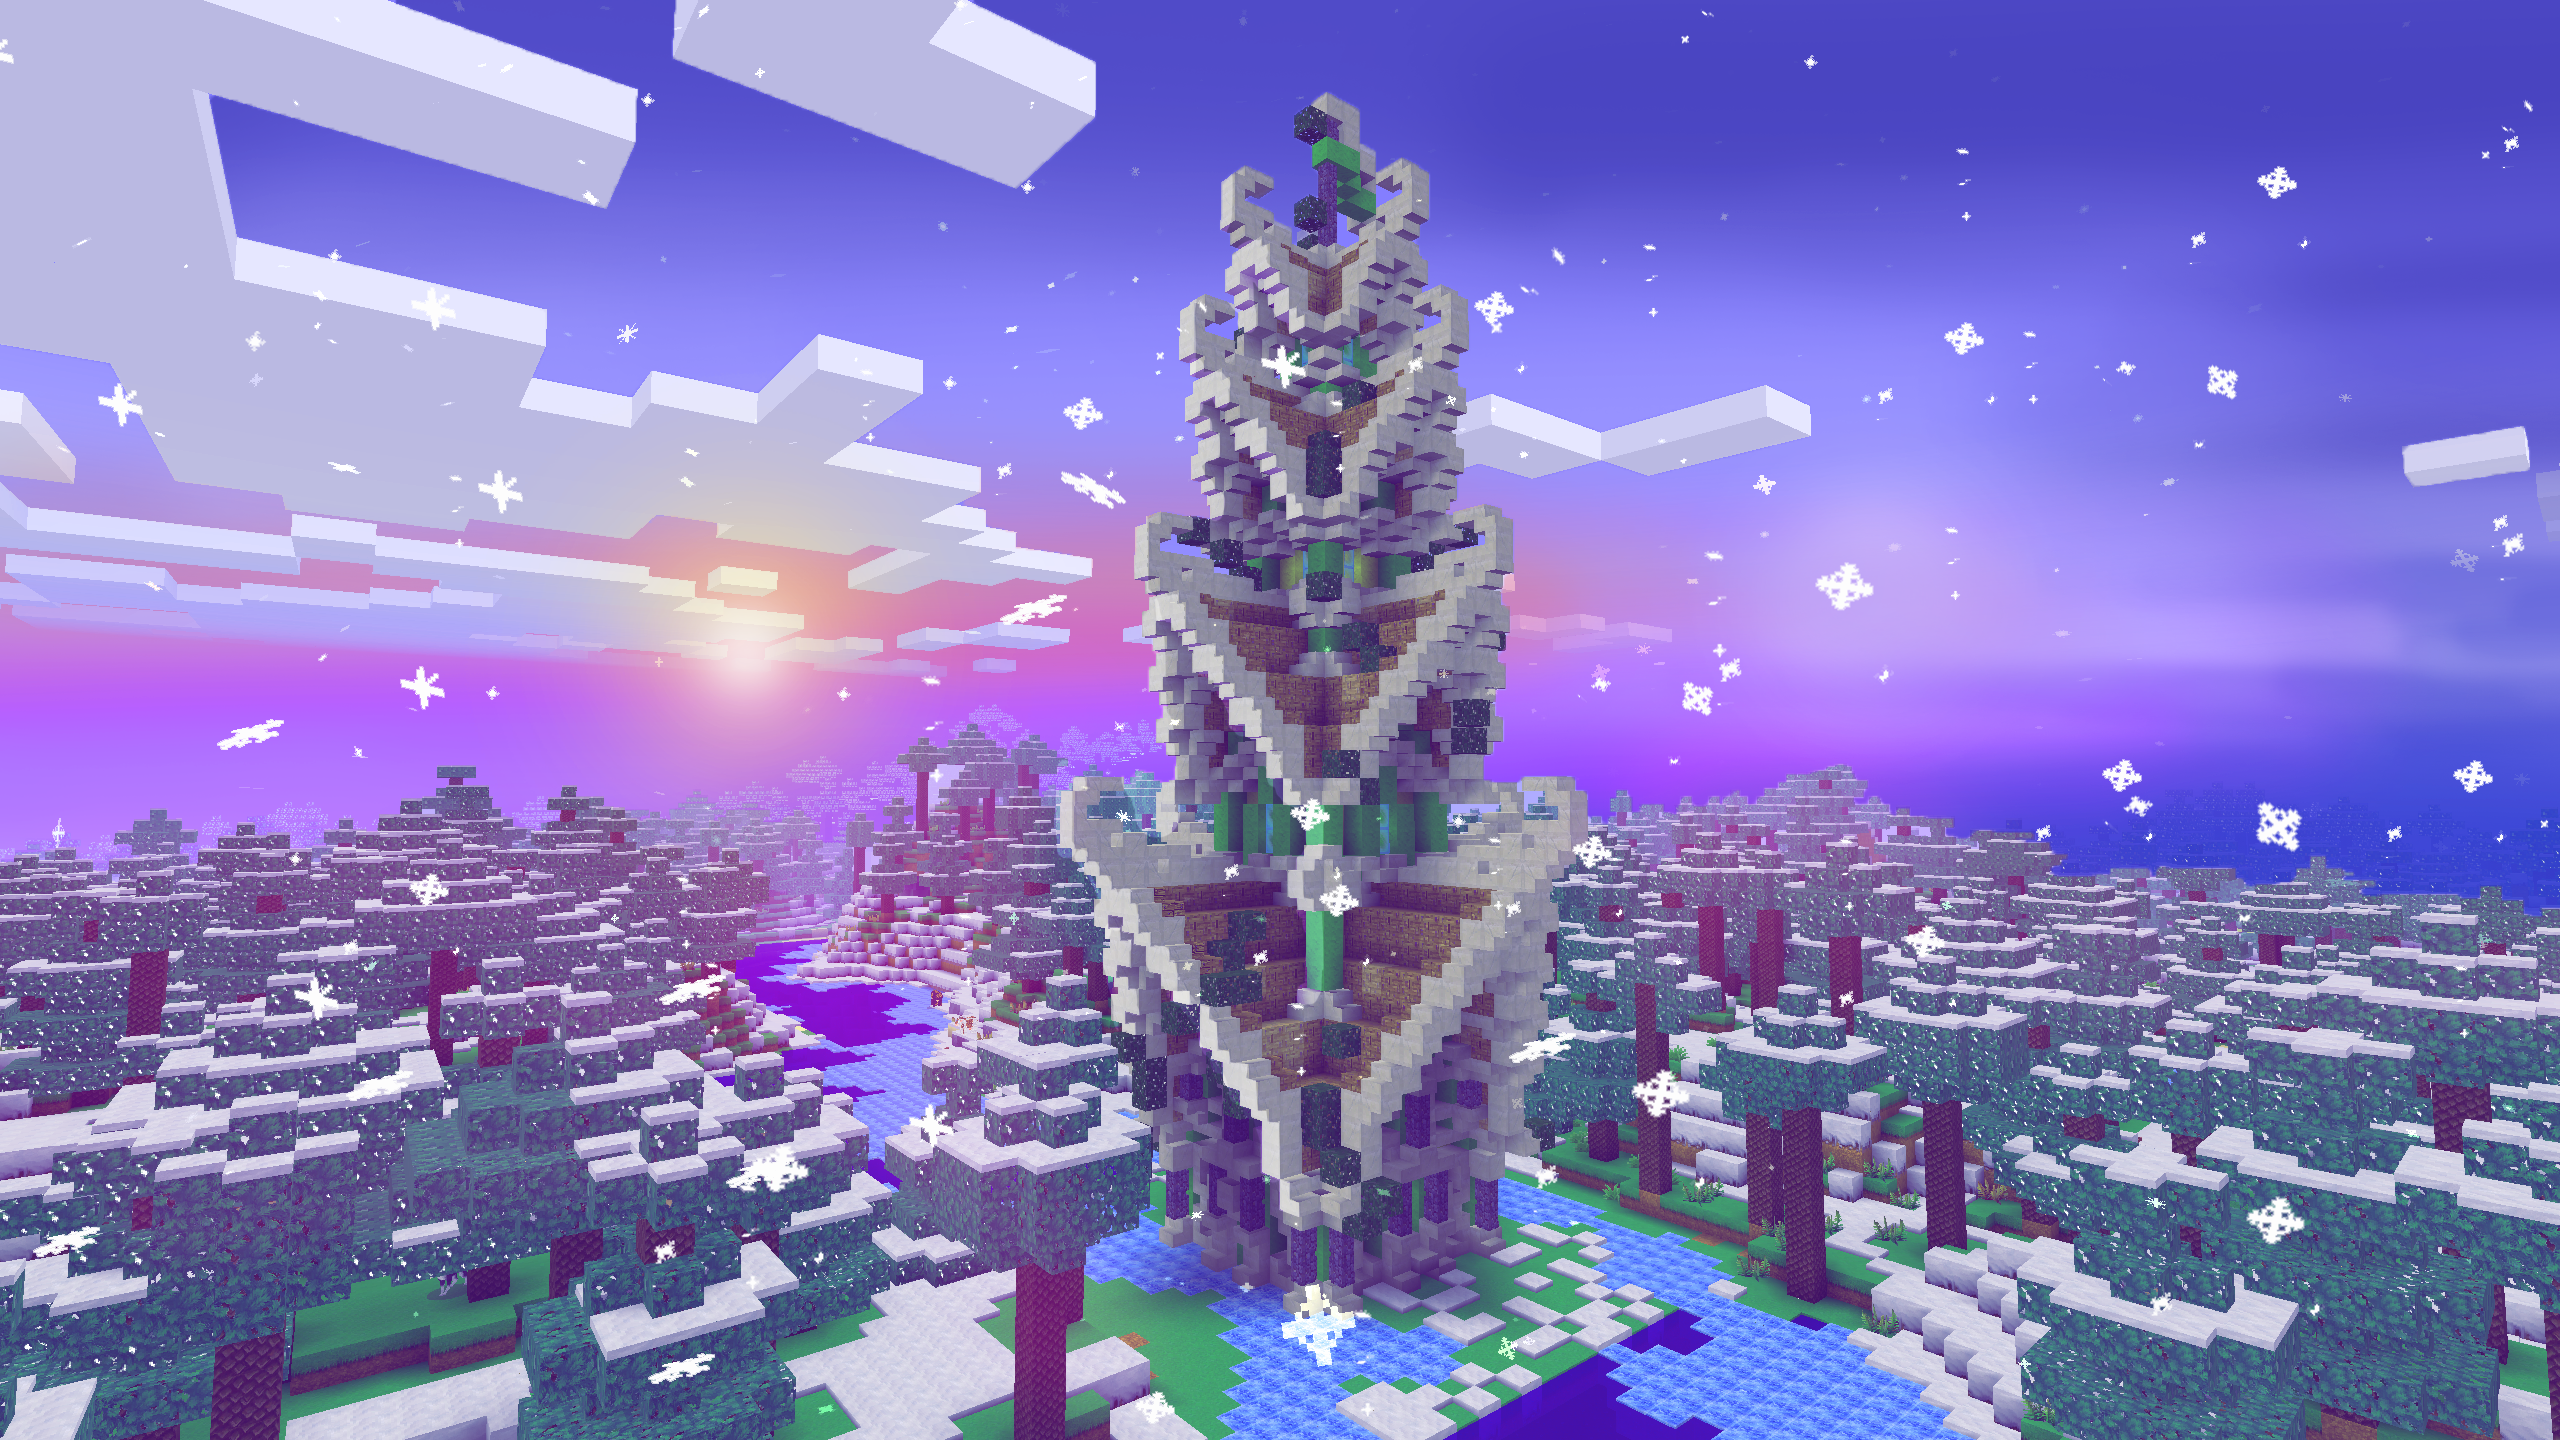 General 2560x1440 video games PC gaming Christmas screen shot Minecraft